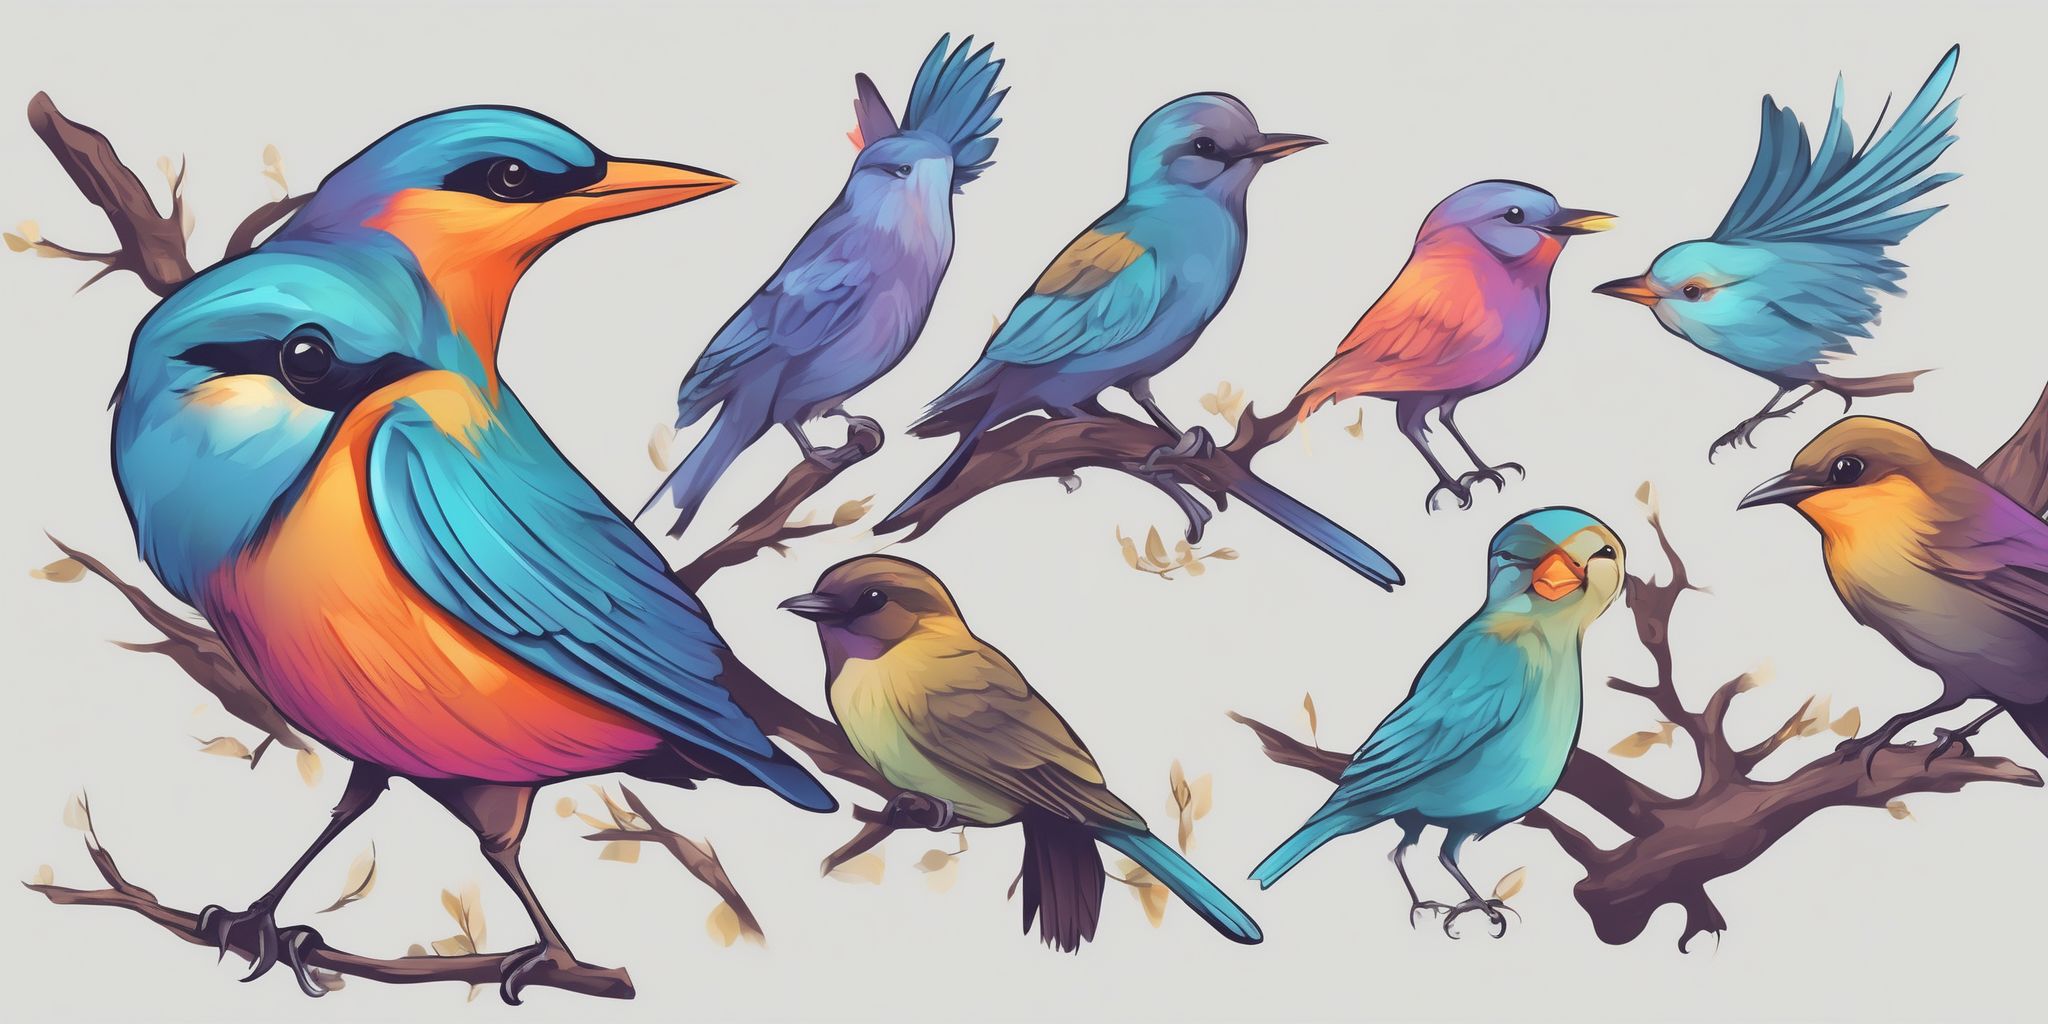 Twitter: Bird in illustration style with gradients and white background